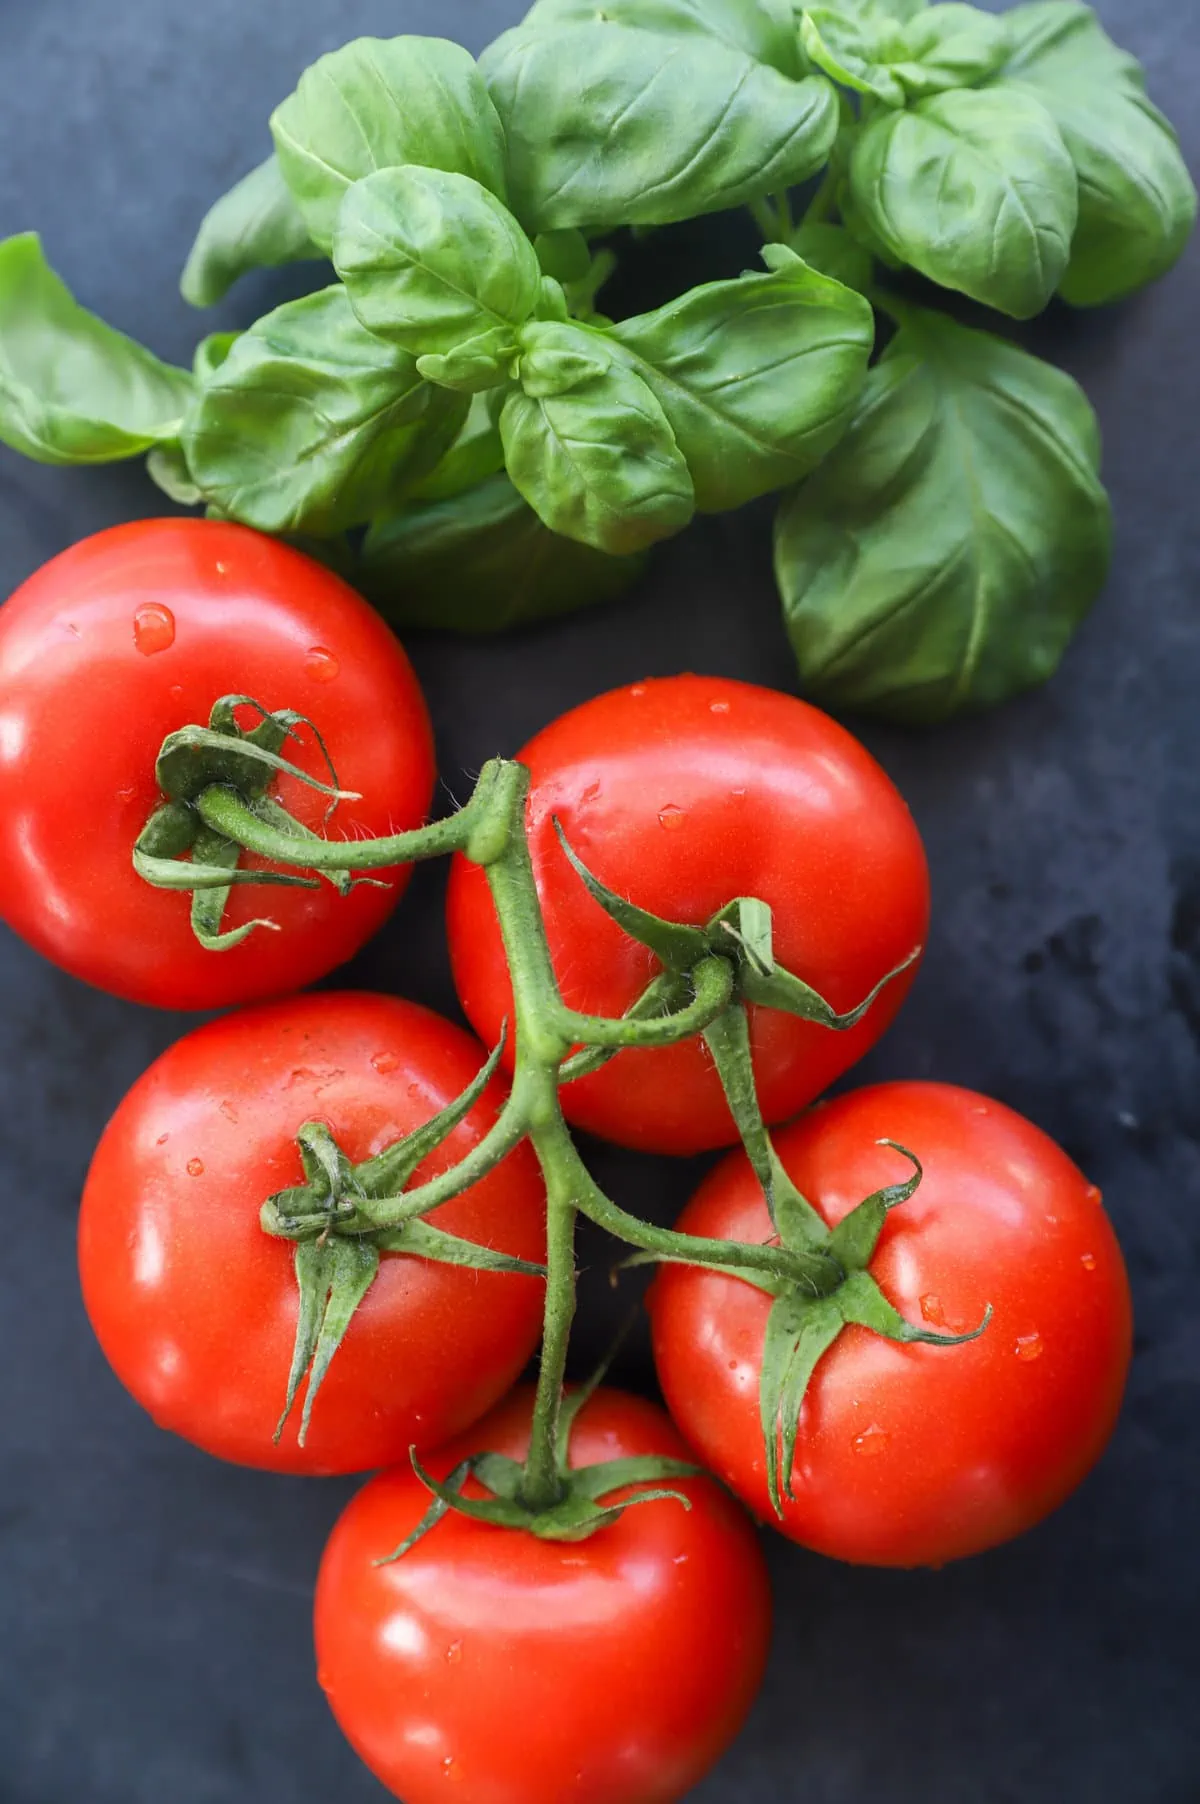 Tomatoes and basil on a table image